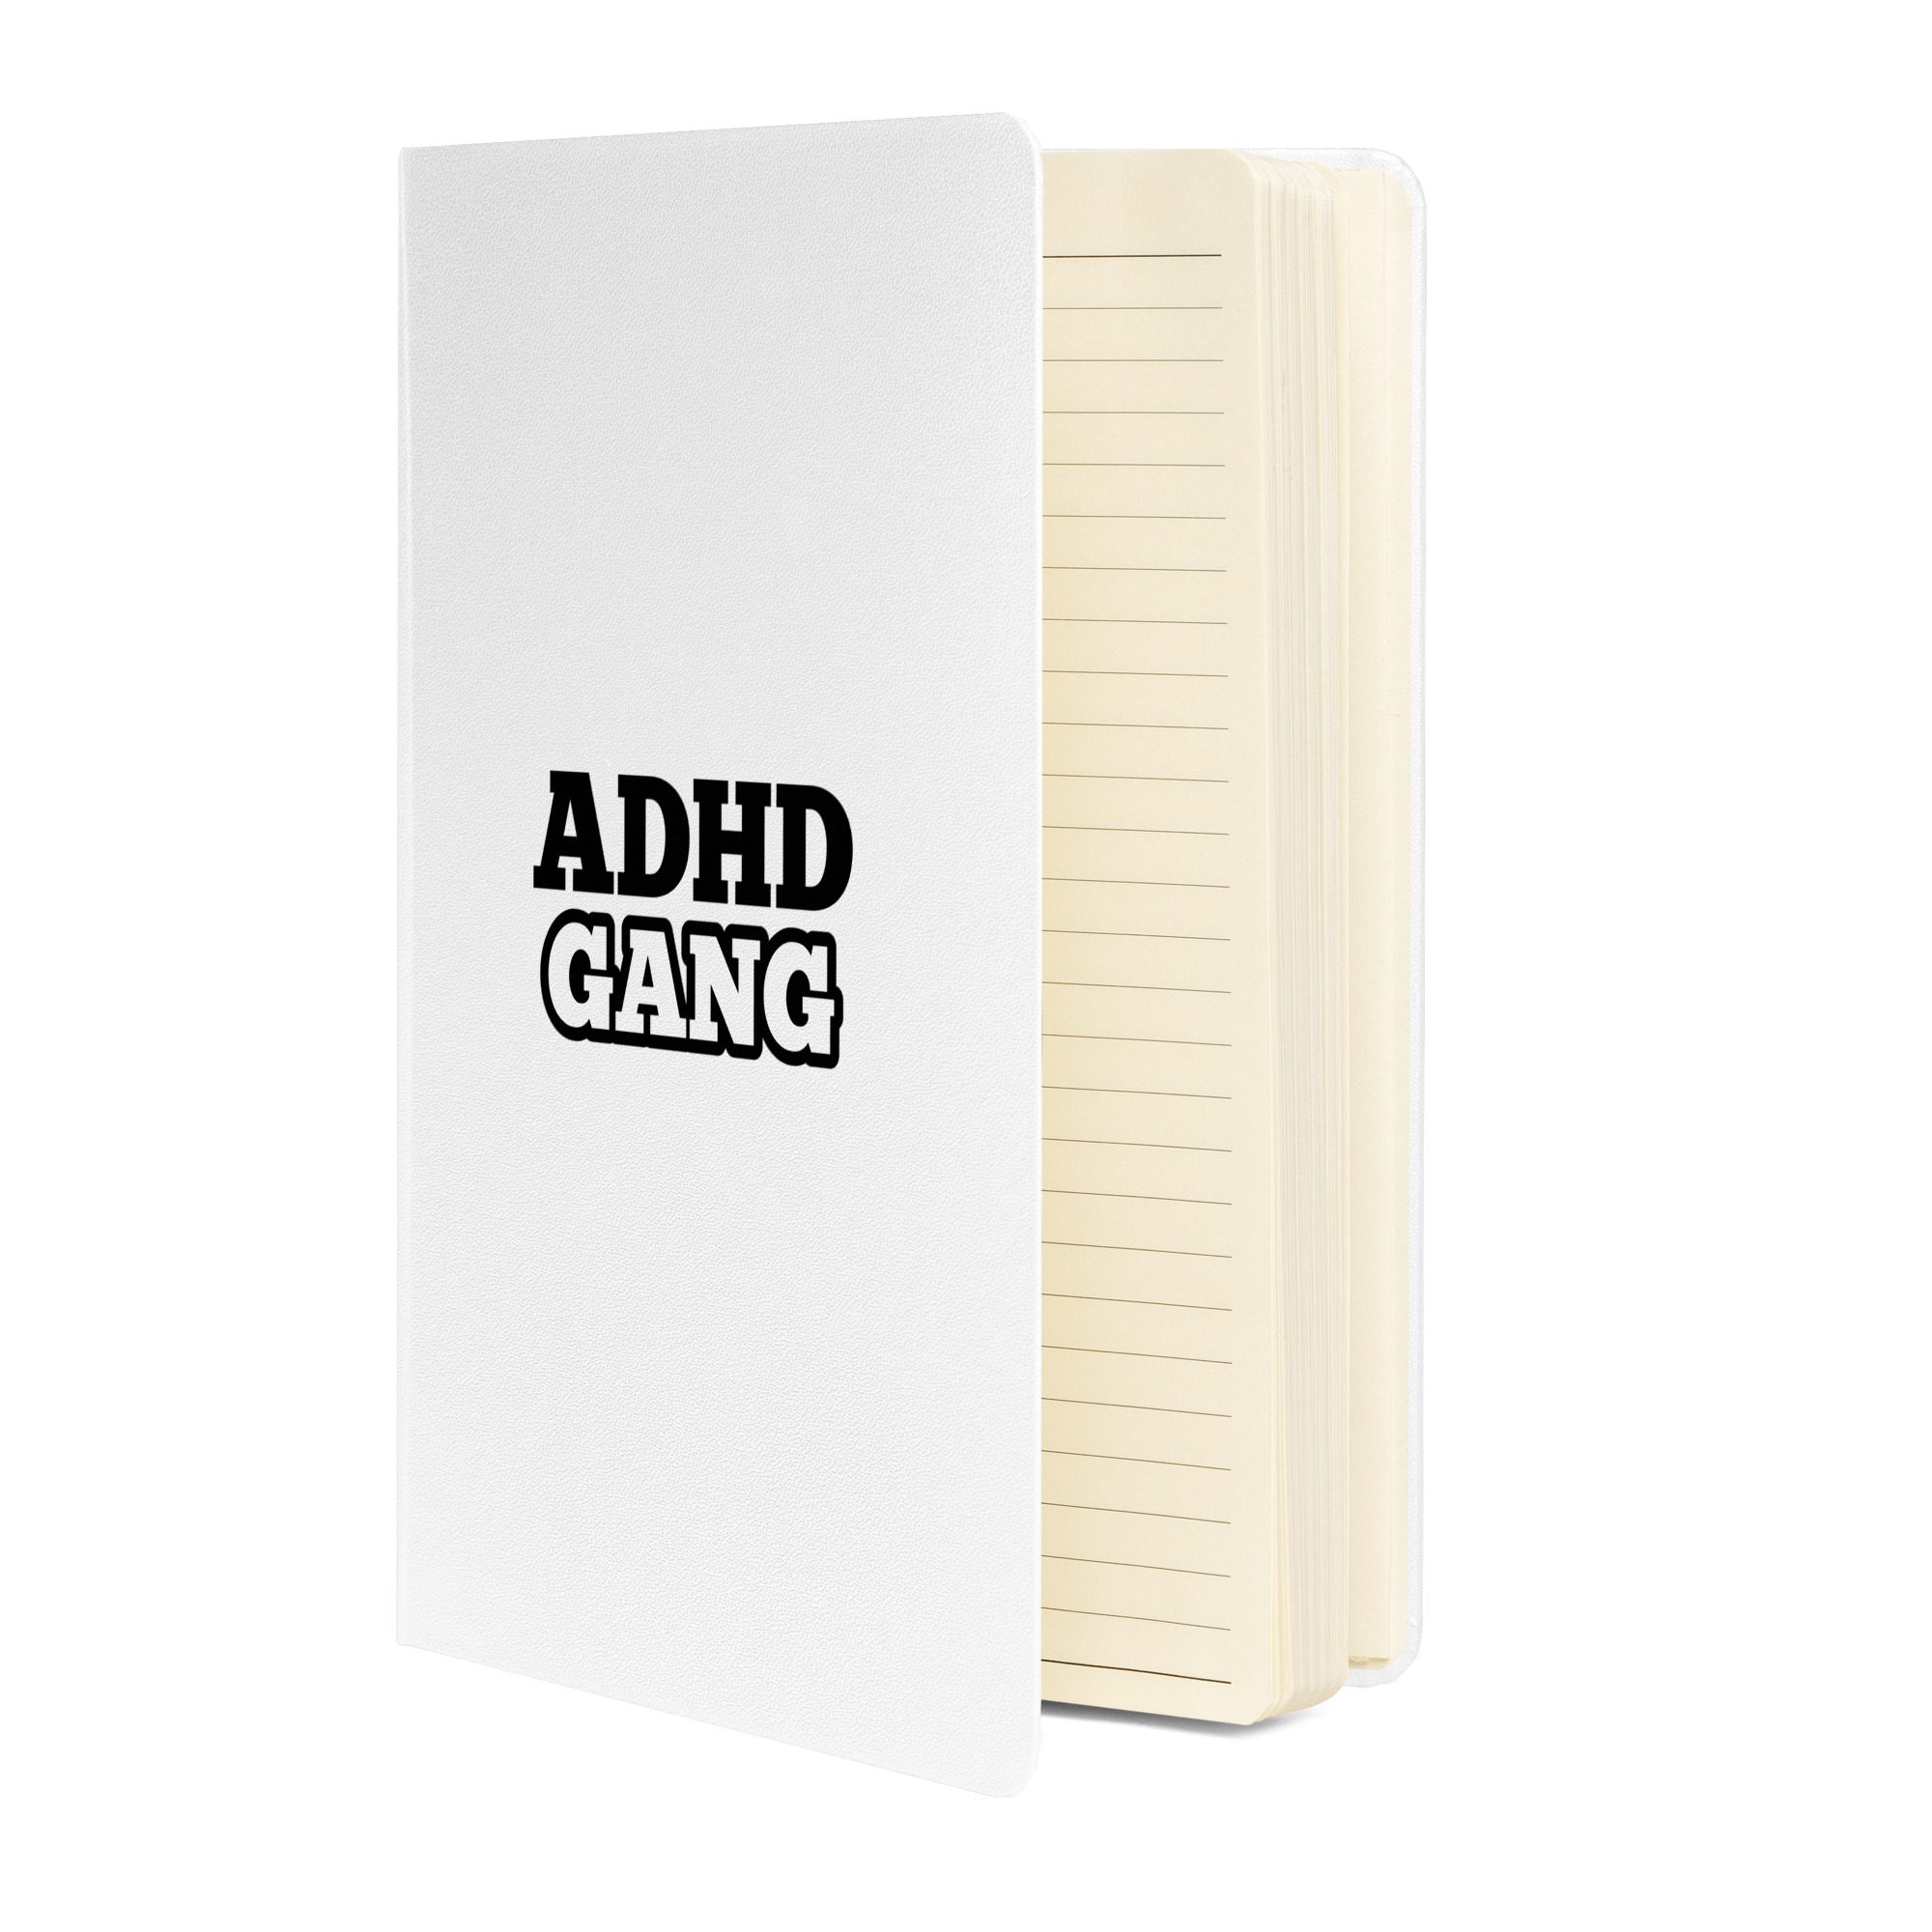 ADHD Gang Hardcover Bound Notebook